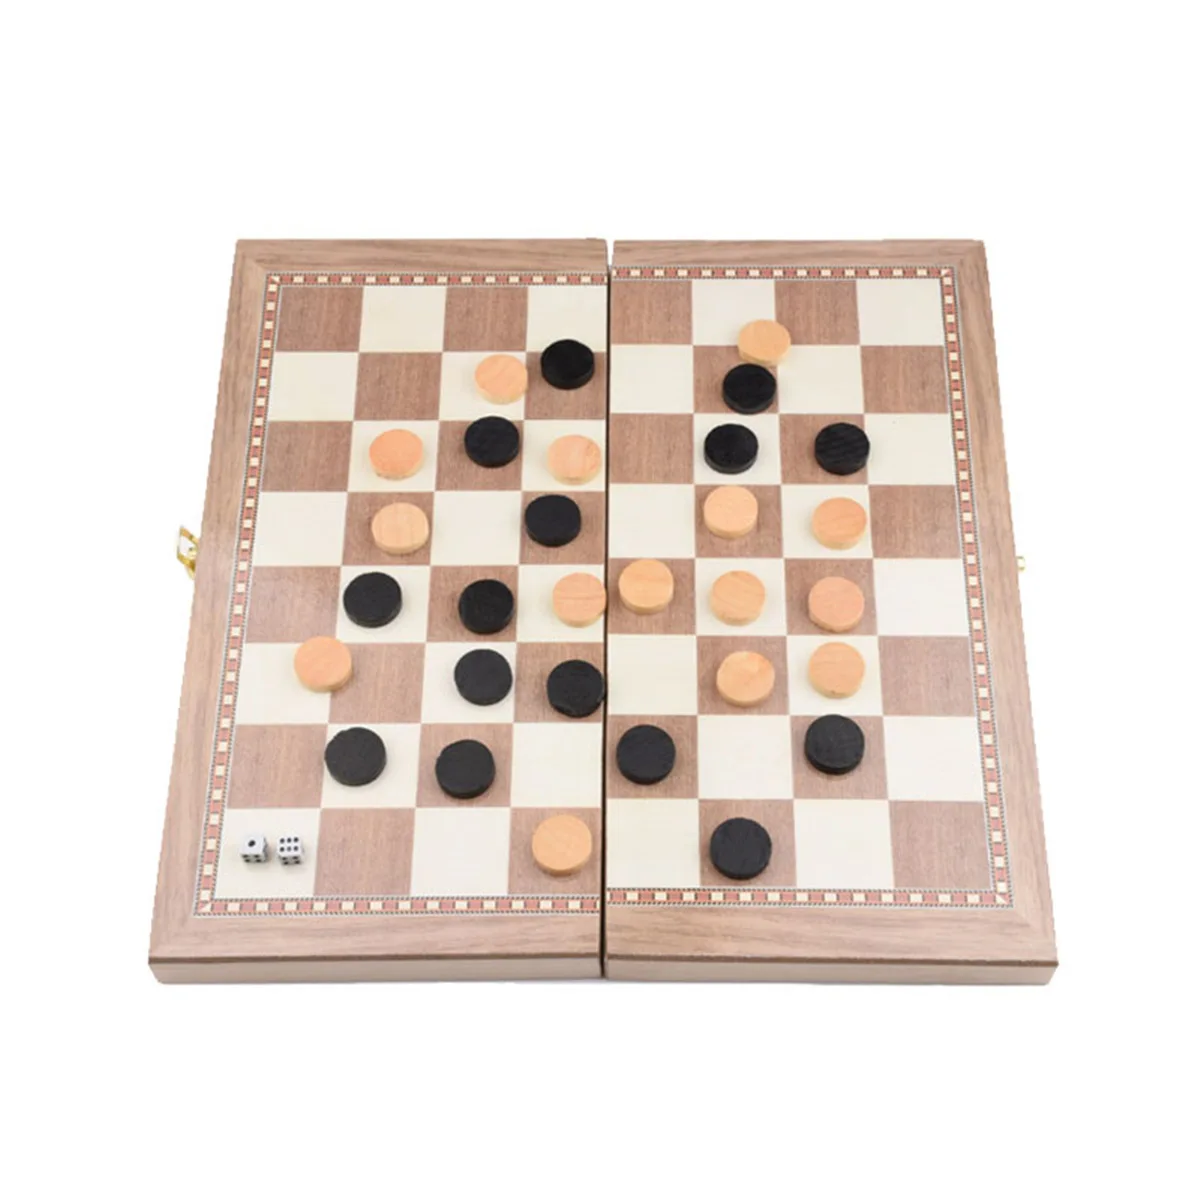 Hot wholesale Wooden chess board game new toys wooden chess set wooden chess pieces